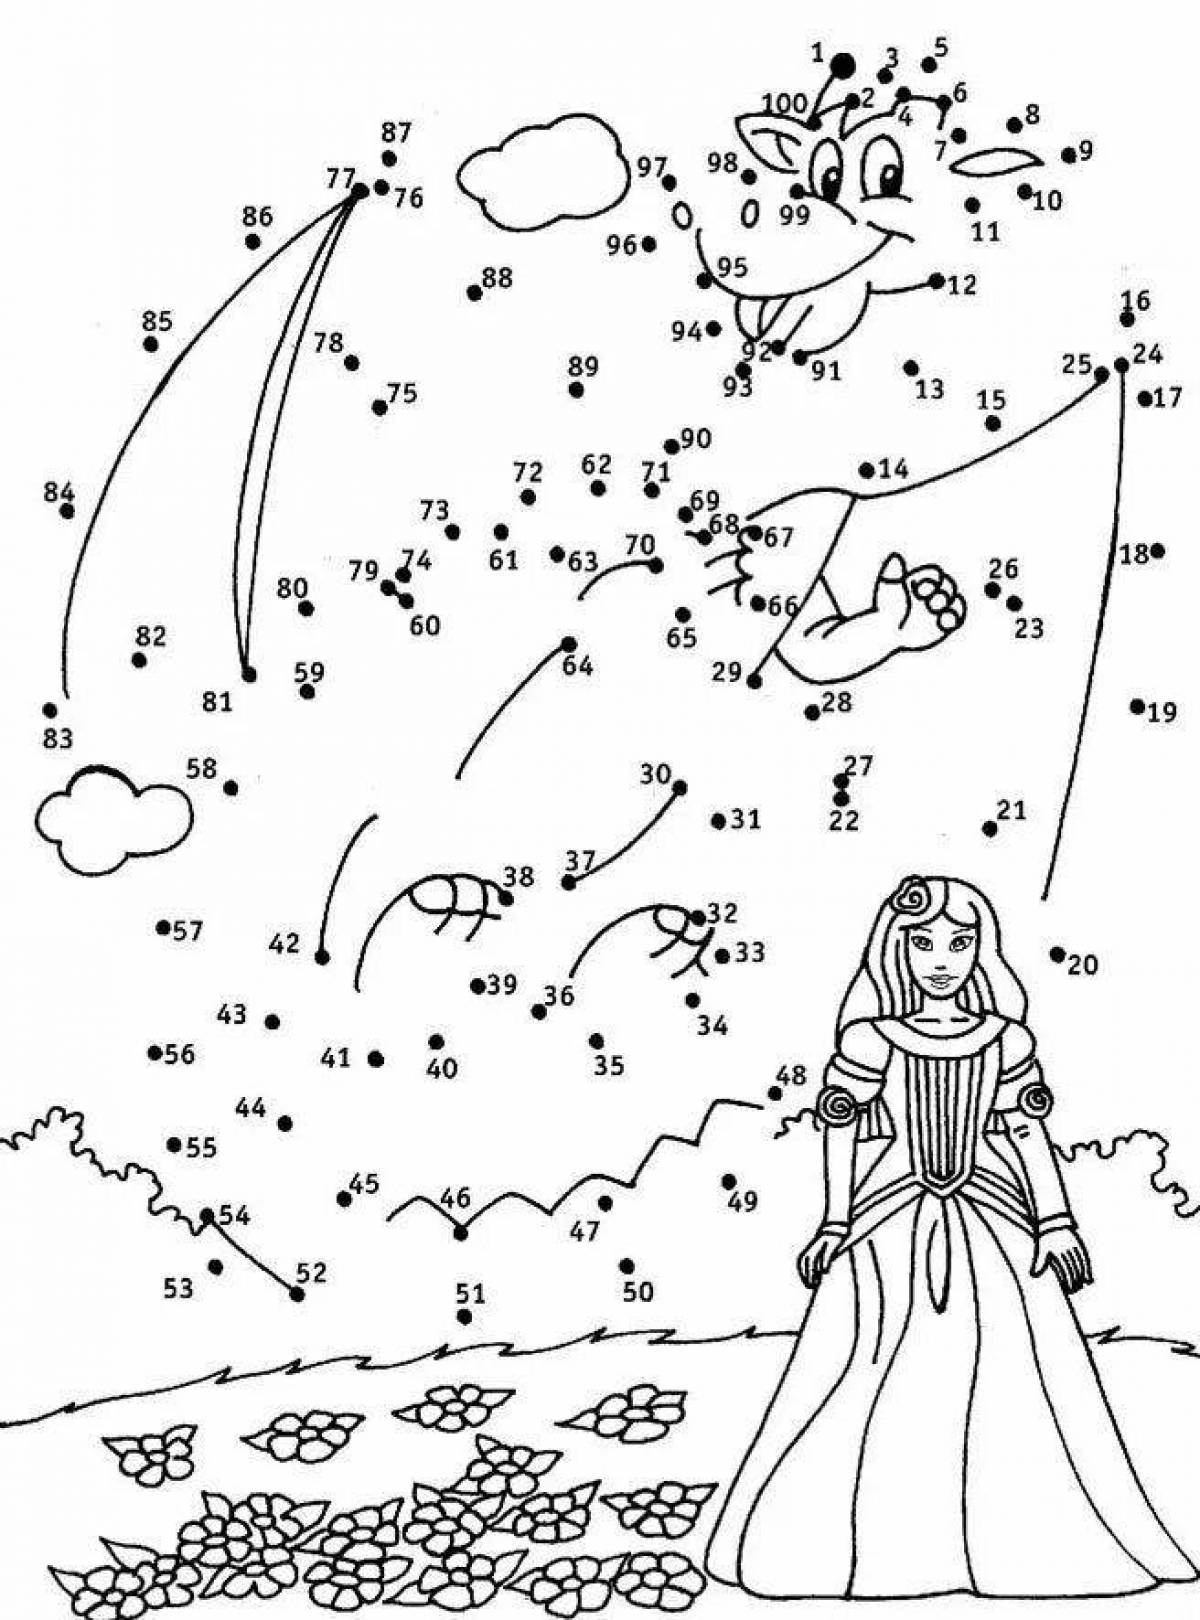 Playful connect by numbers coloring page